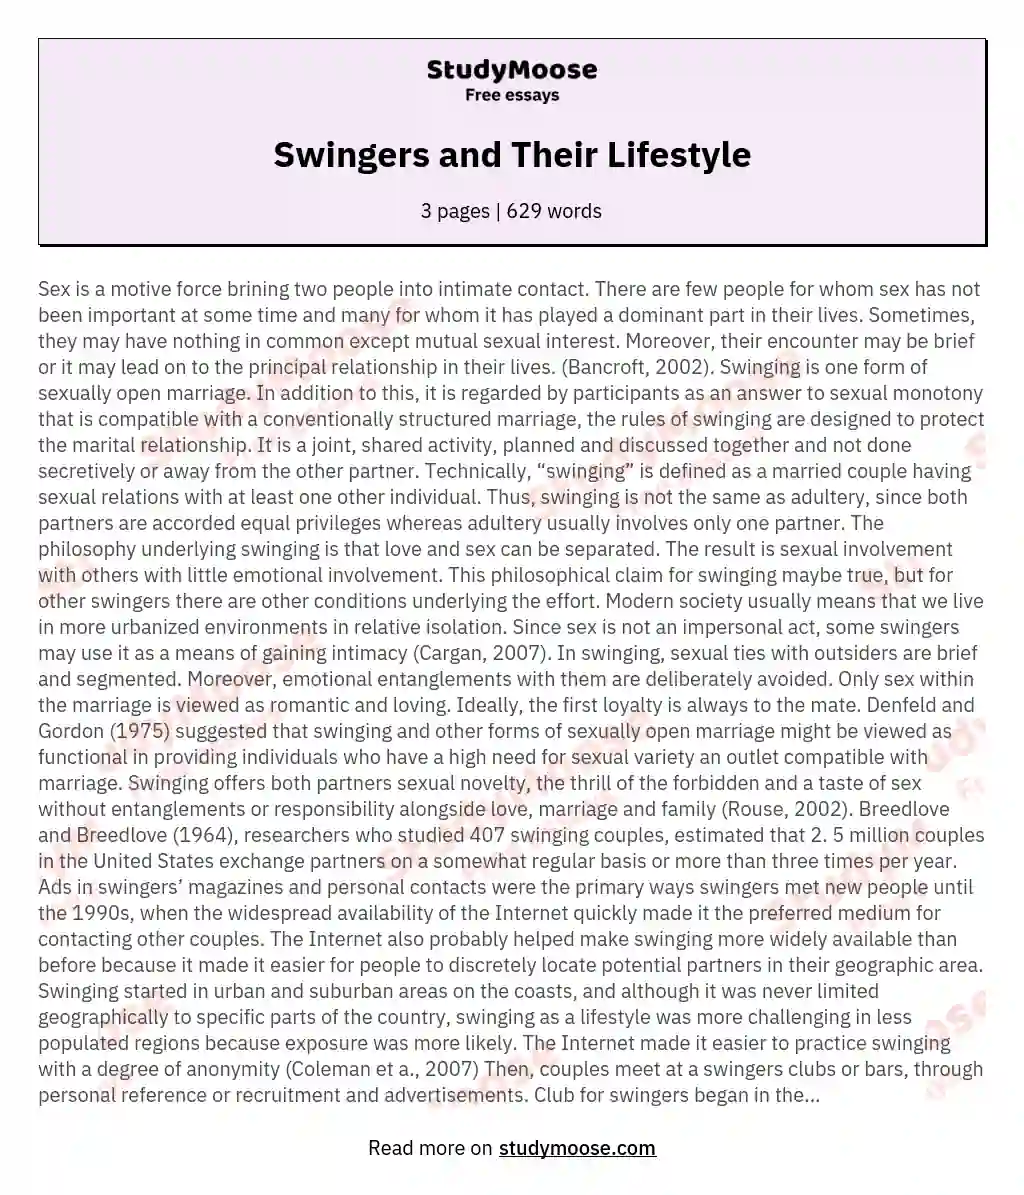 Swingers and Their Lifestyle essay